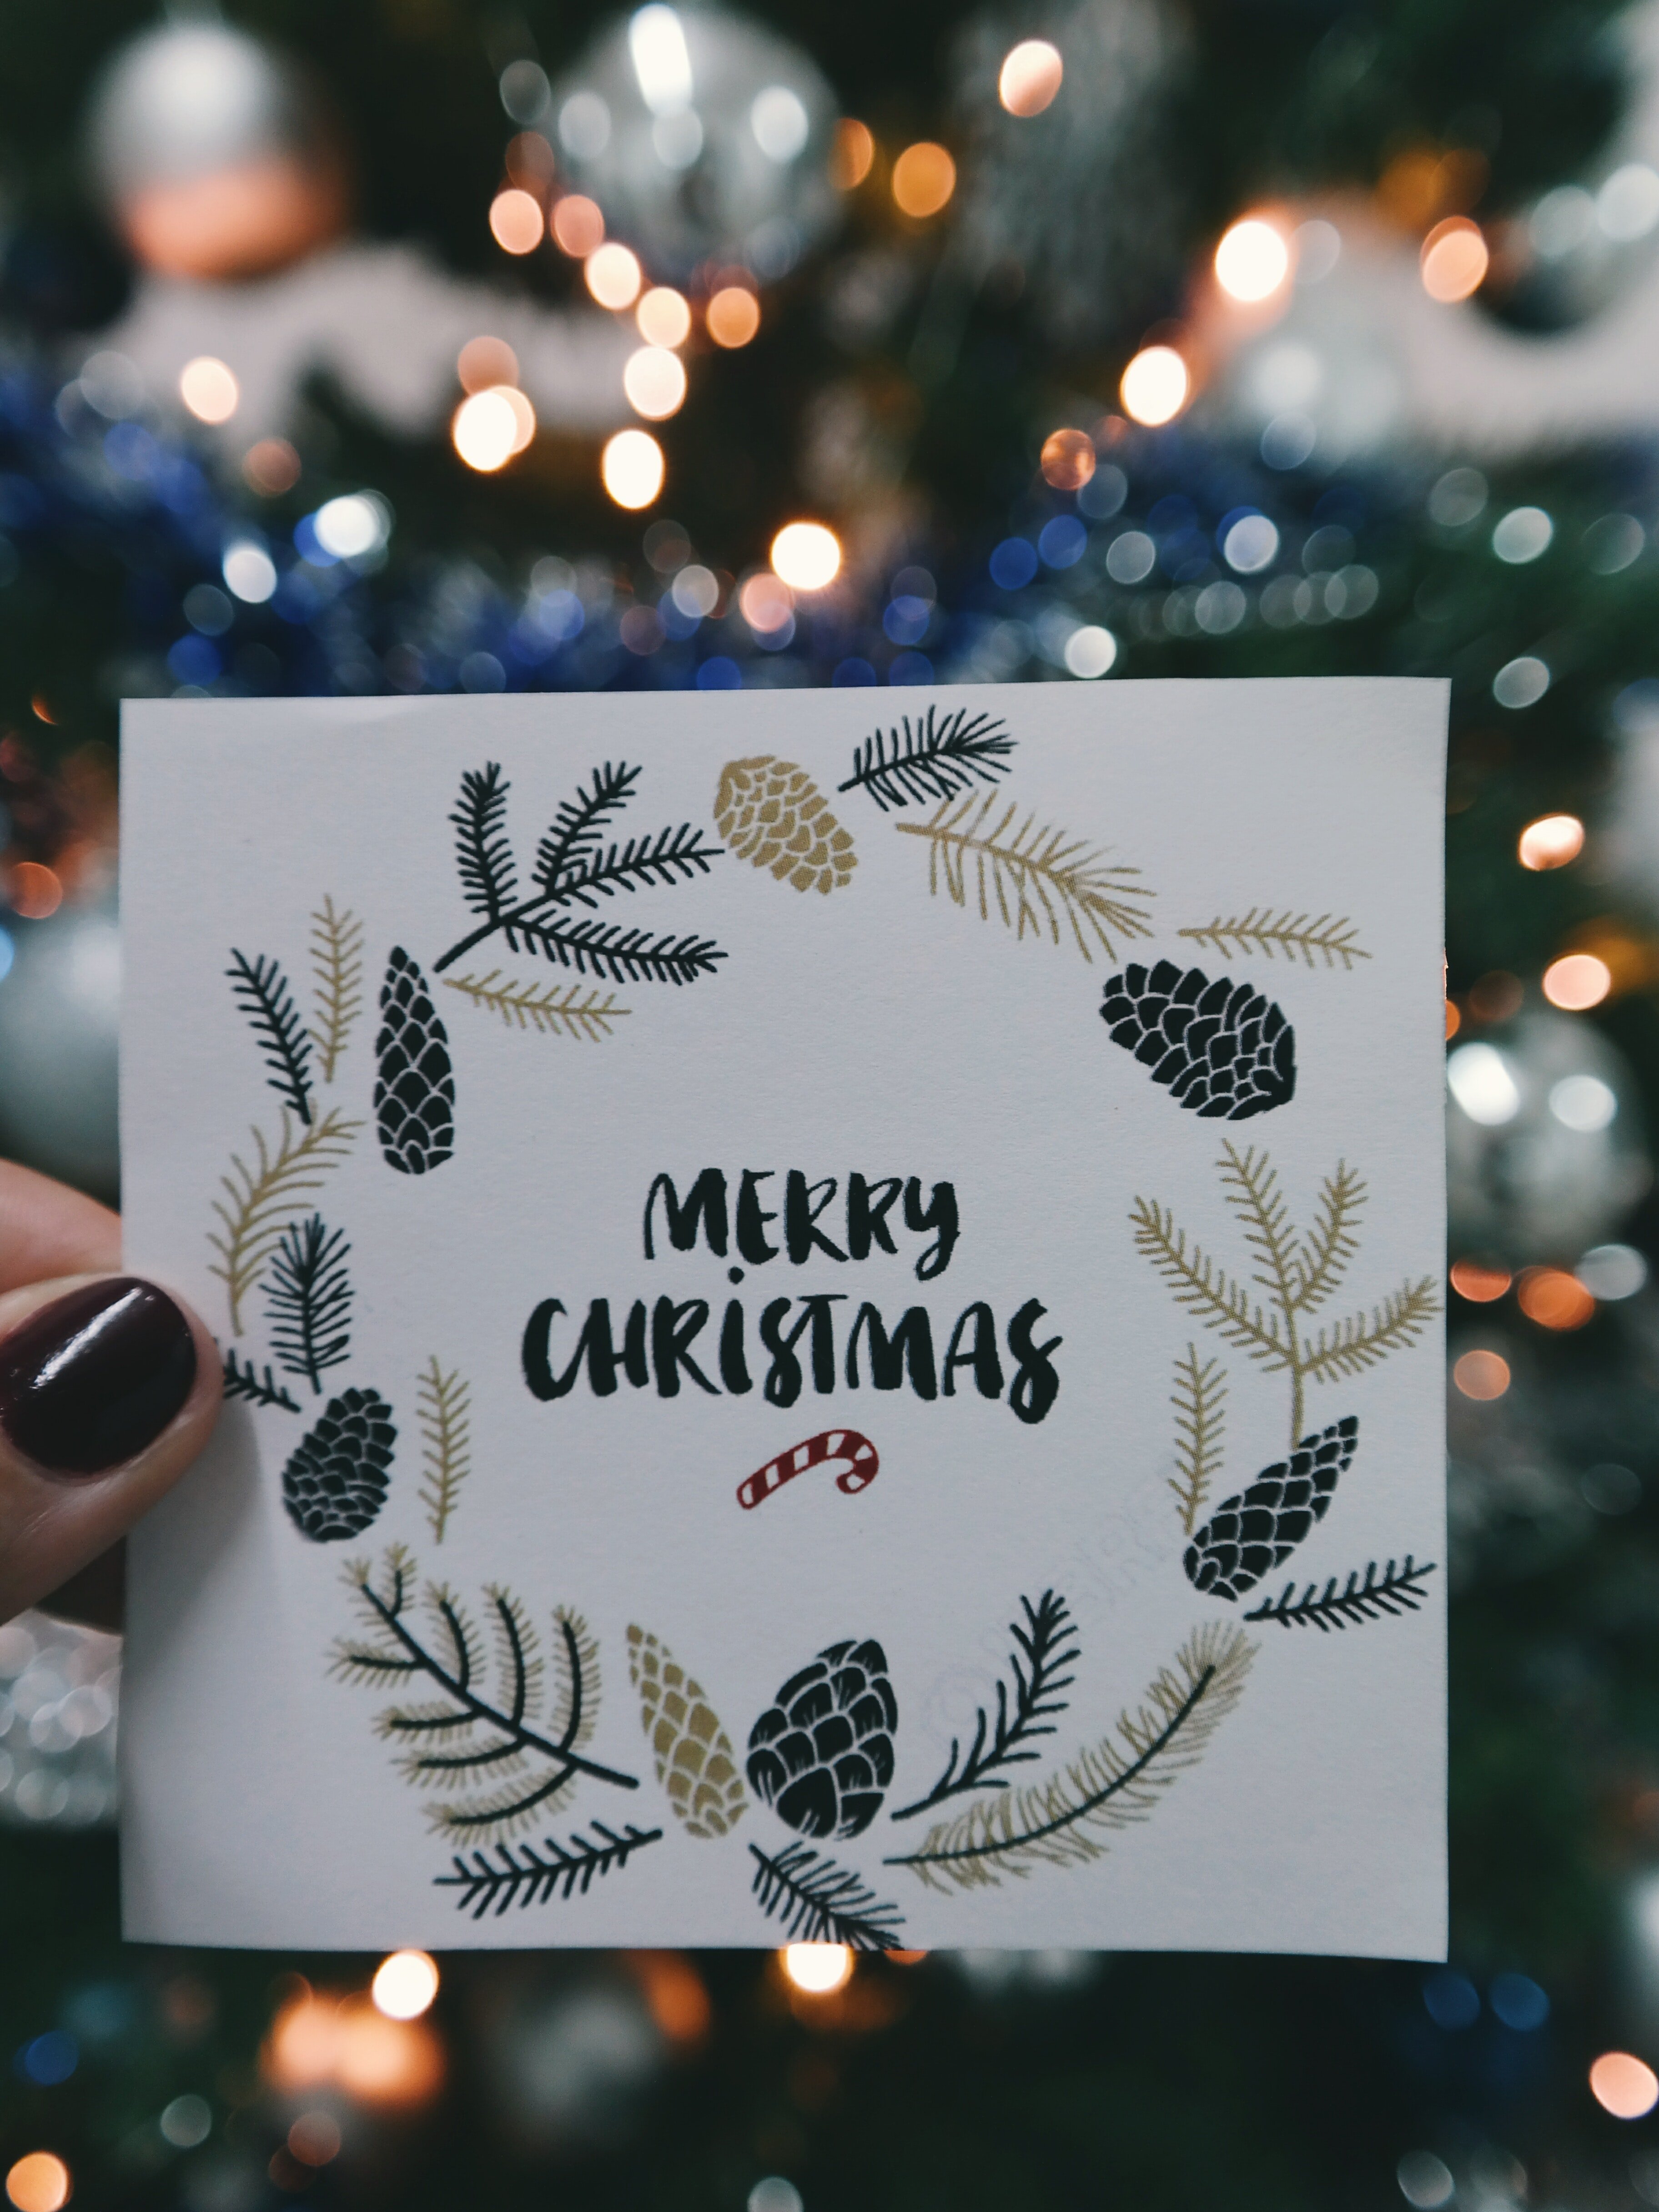 Christmas card in front of tree | Photo: Pexels.com